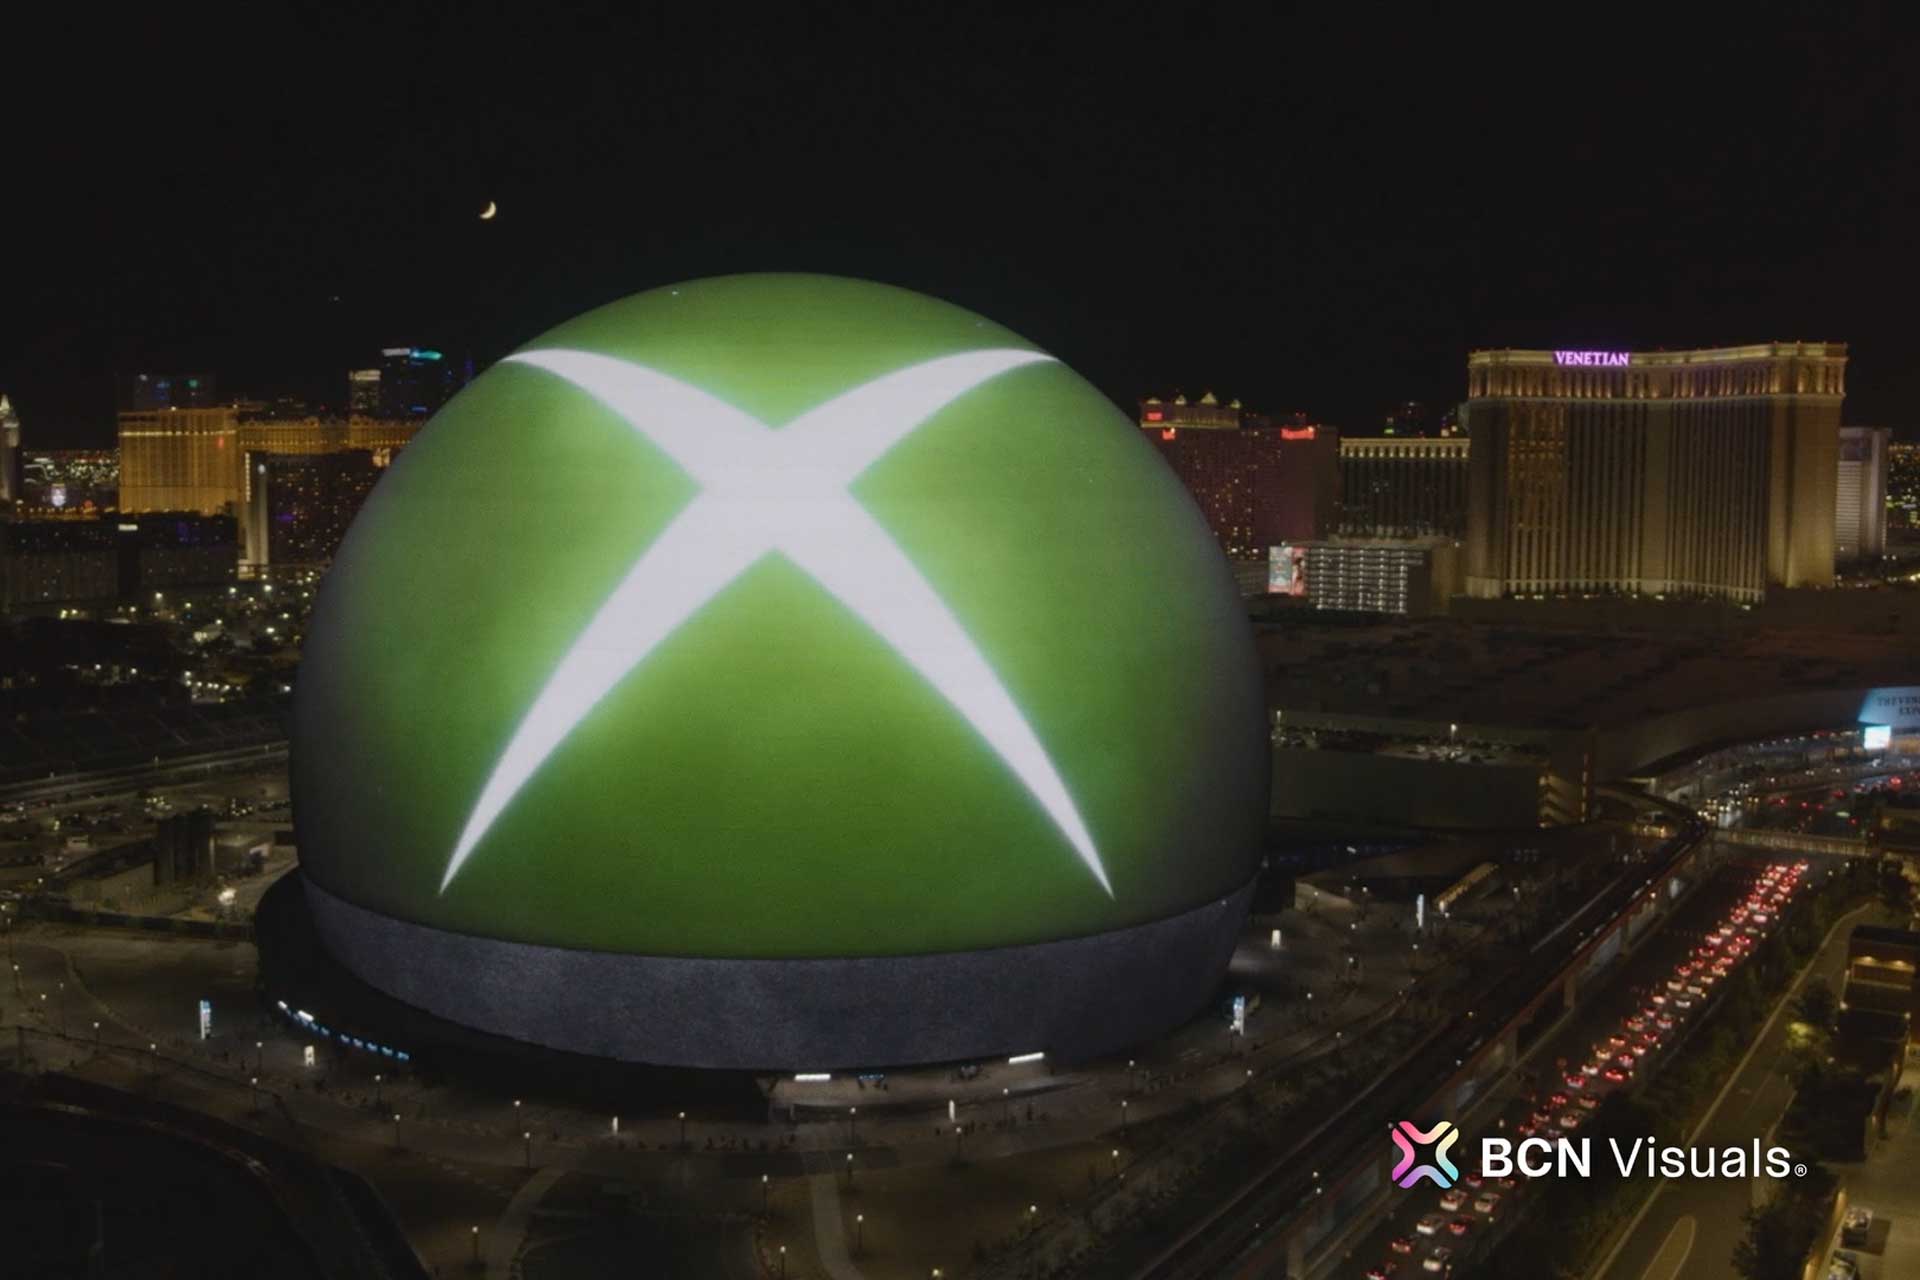 Xbox: Power Your Dreams | MUSE Creative Awards